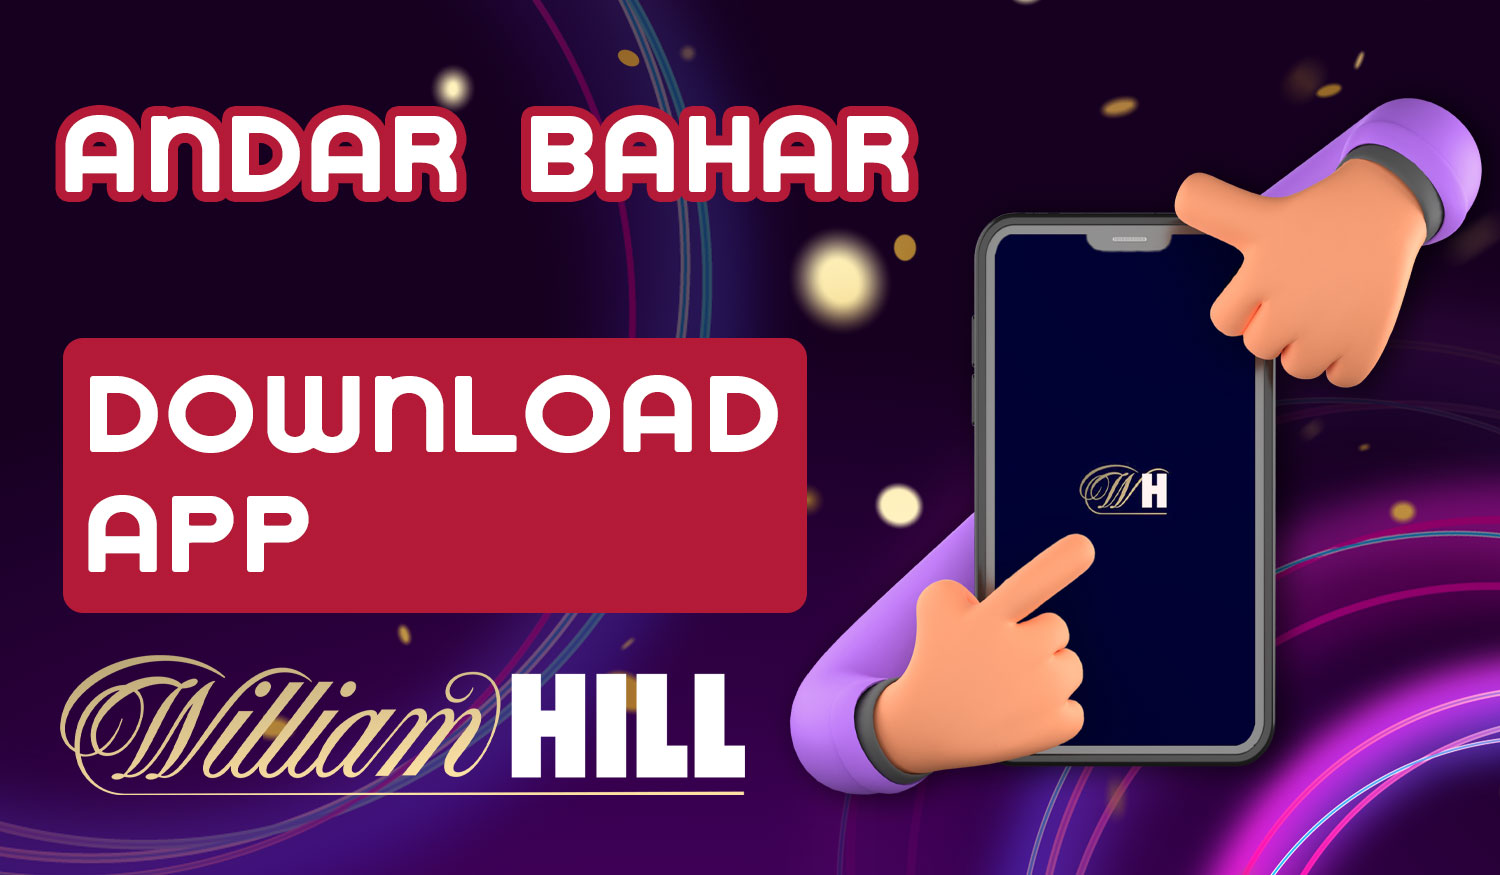 William Hill provides a mobile application for players from India, where they can enjoy playing Andar Bahar